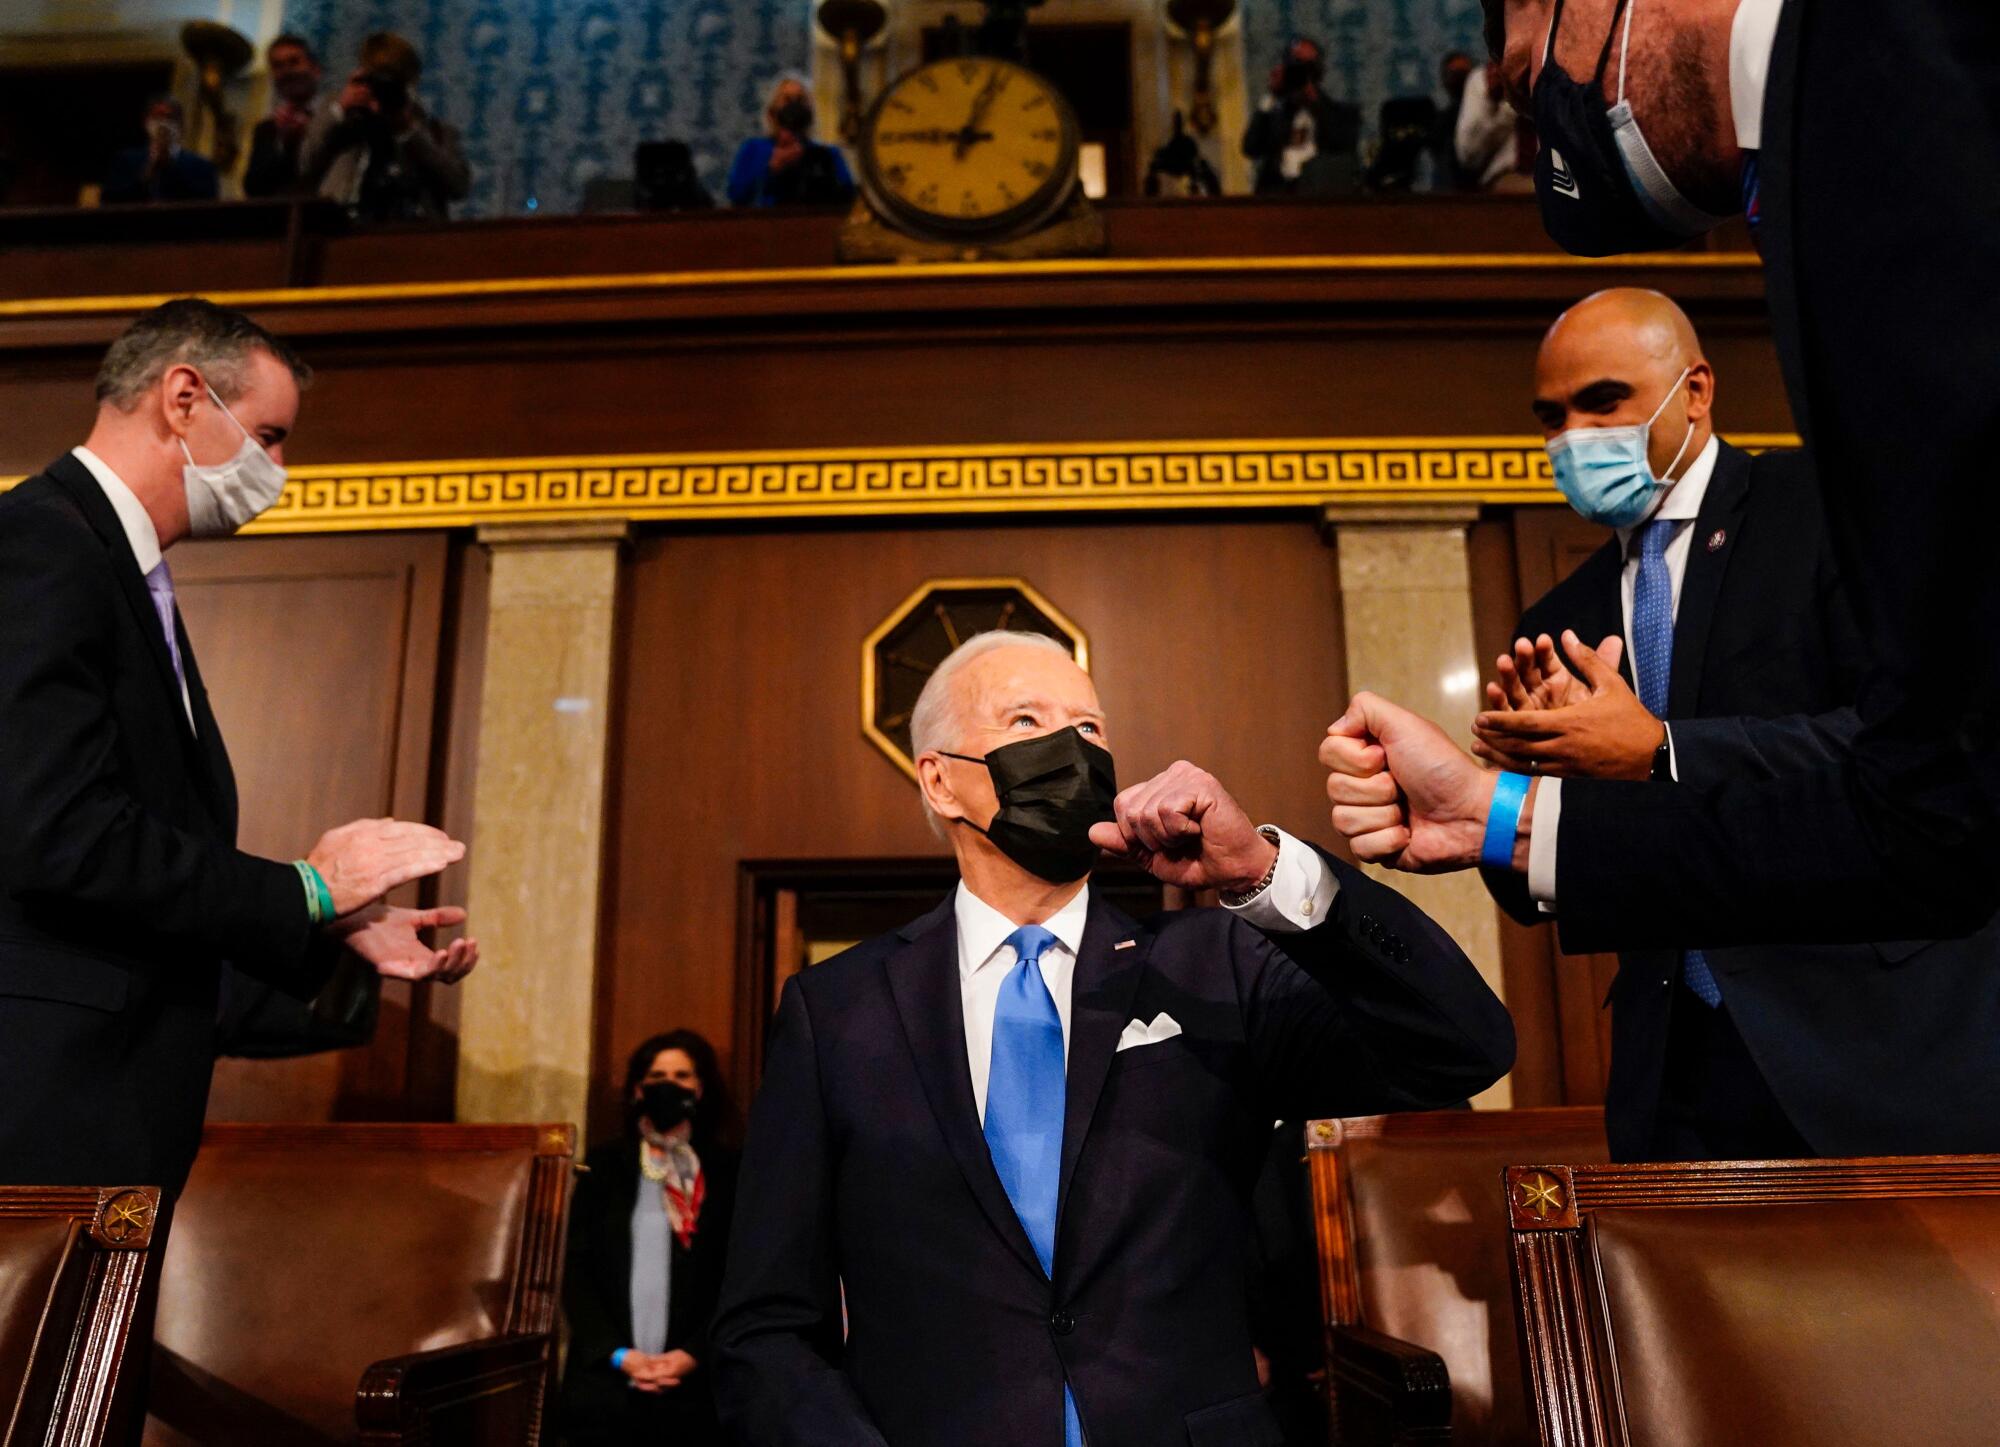 President Biden, in a face mask, bumps arms with another man.